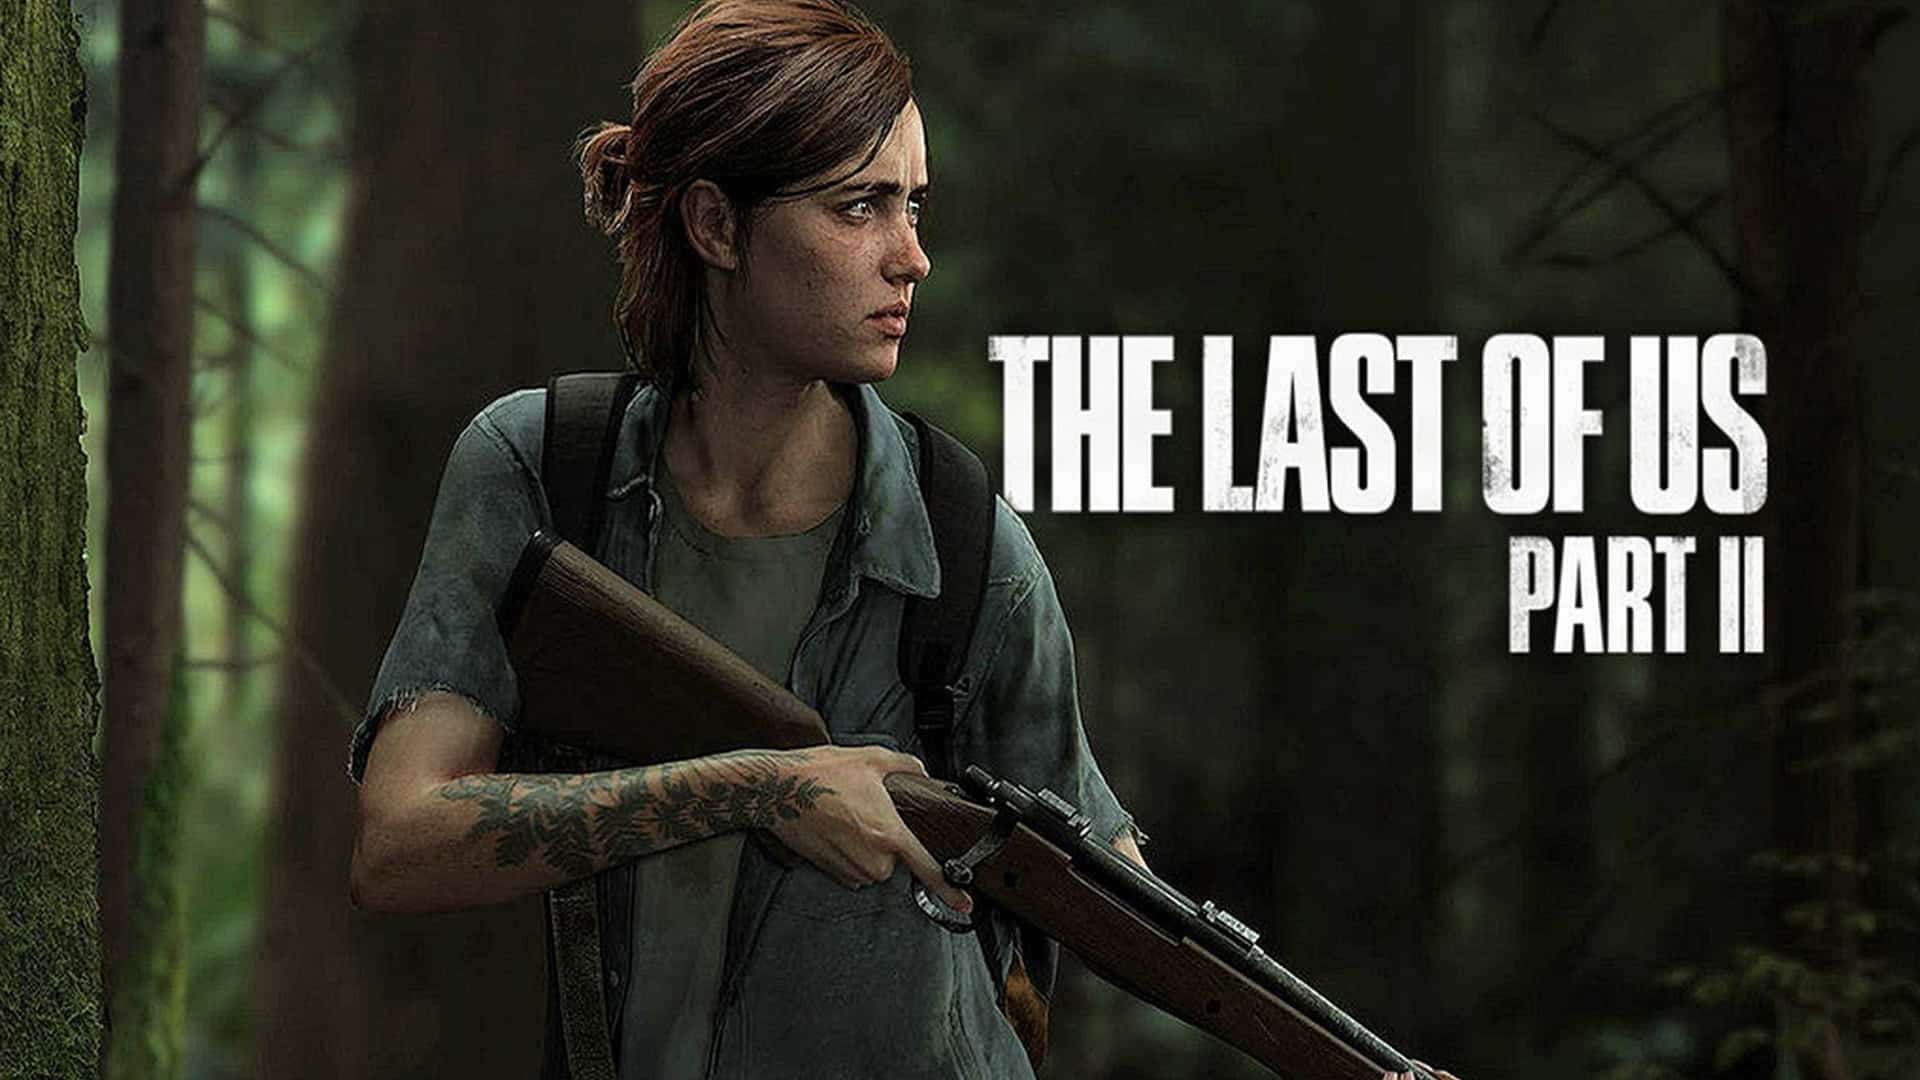 She to live there last year. The last of us игра 1 часть.